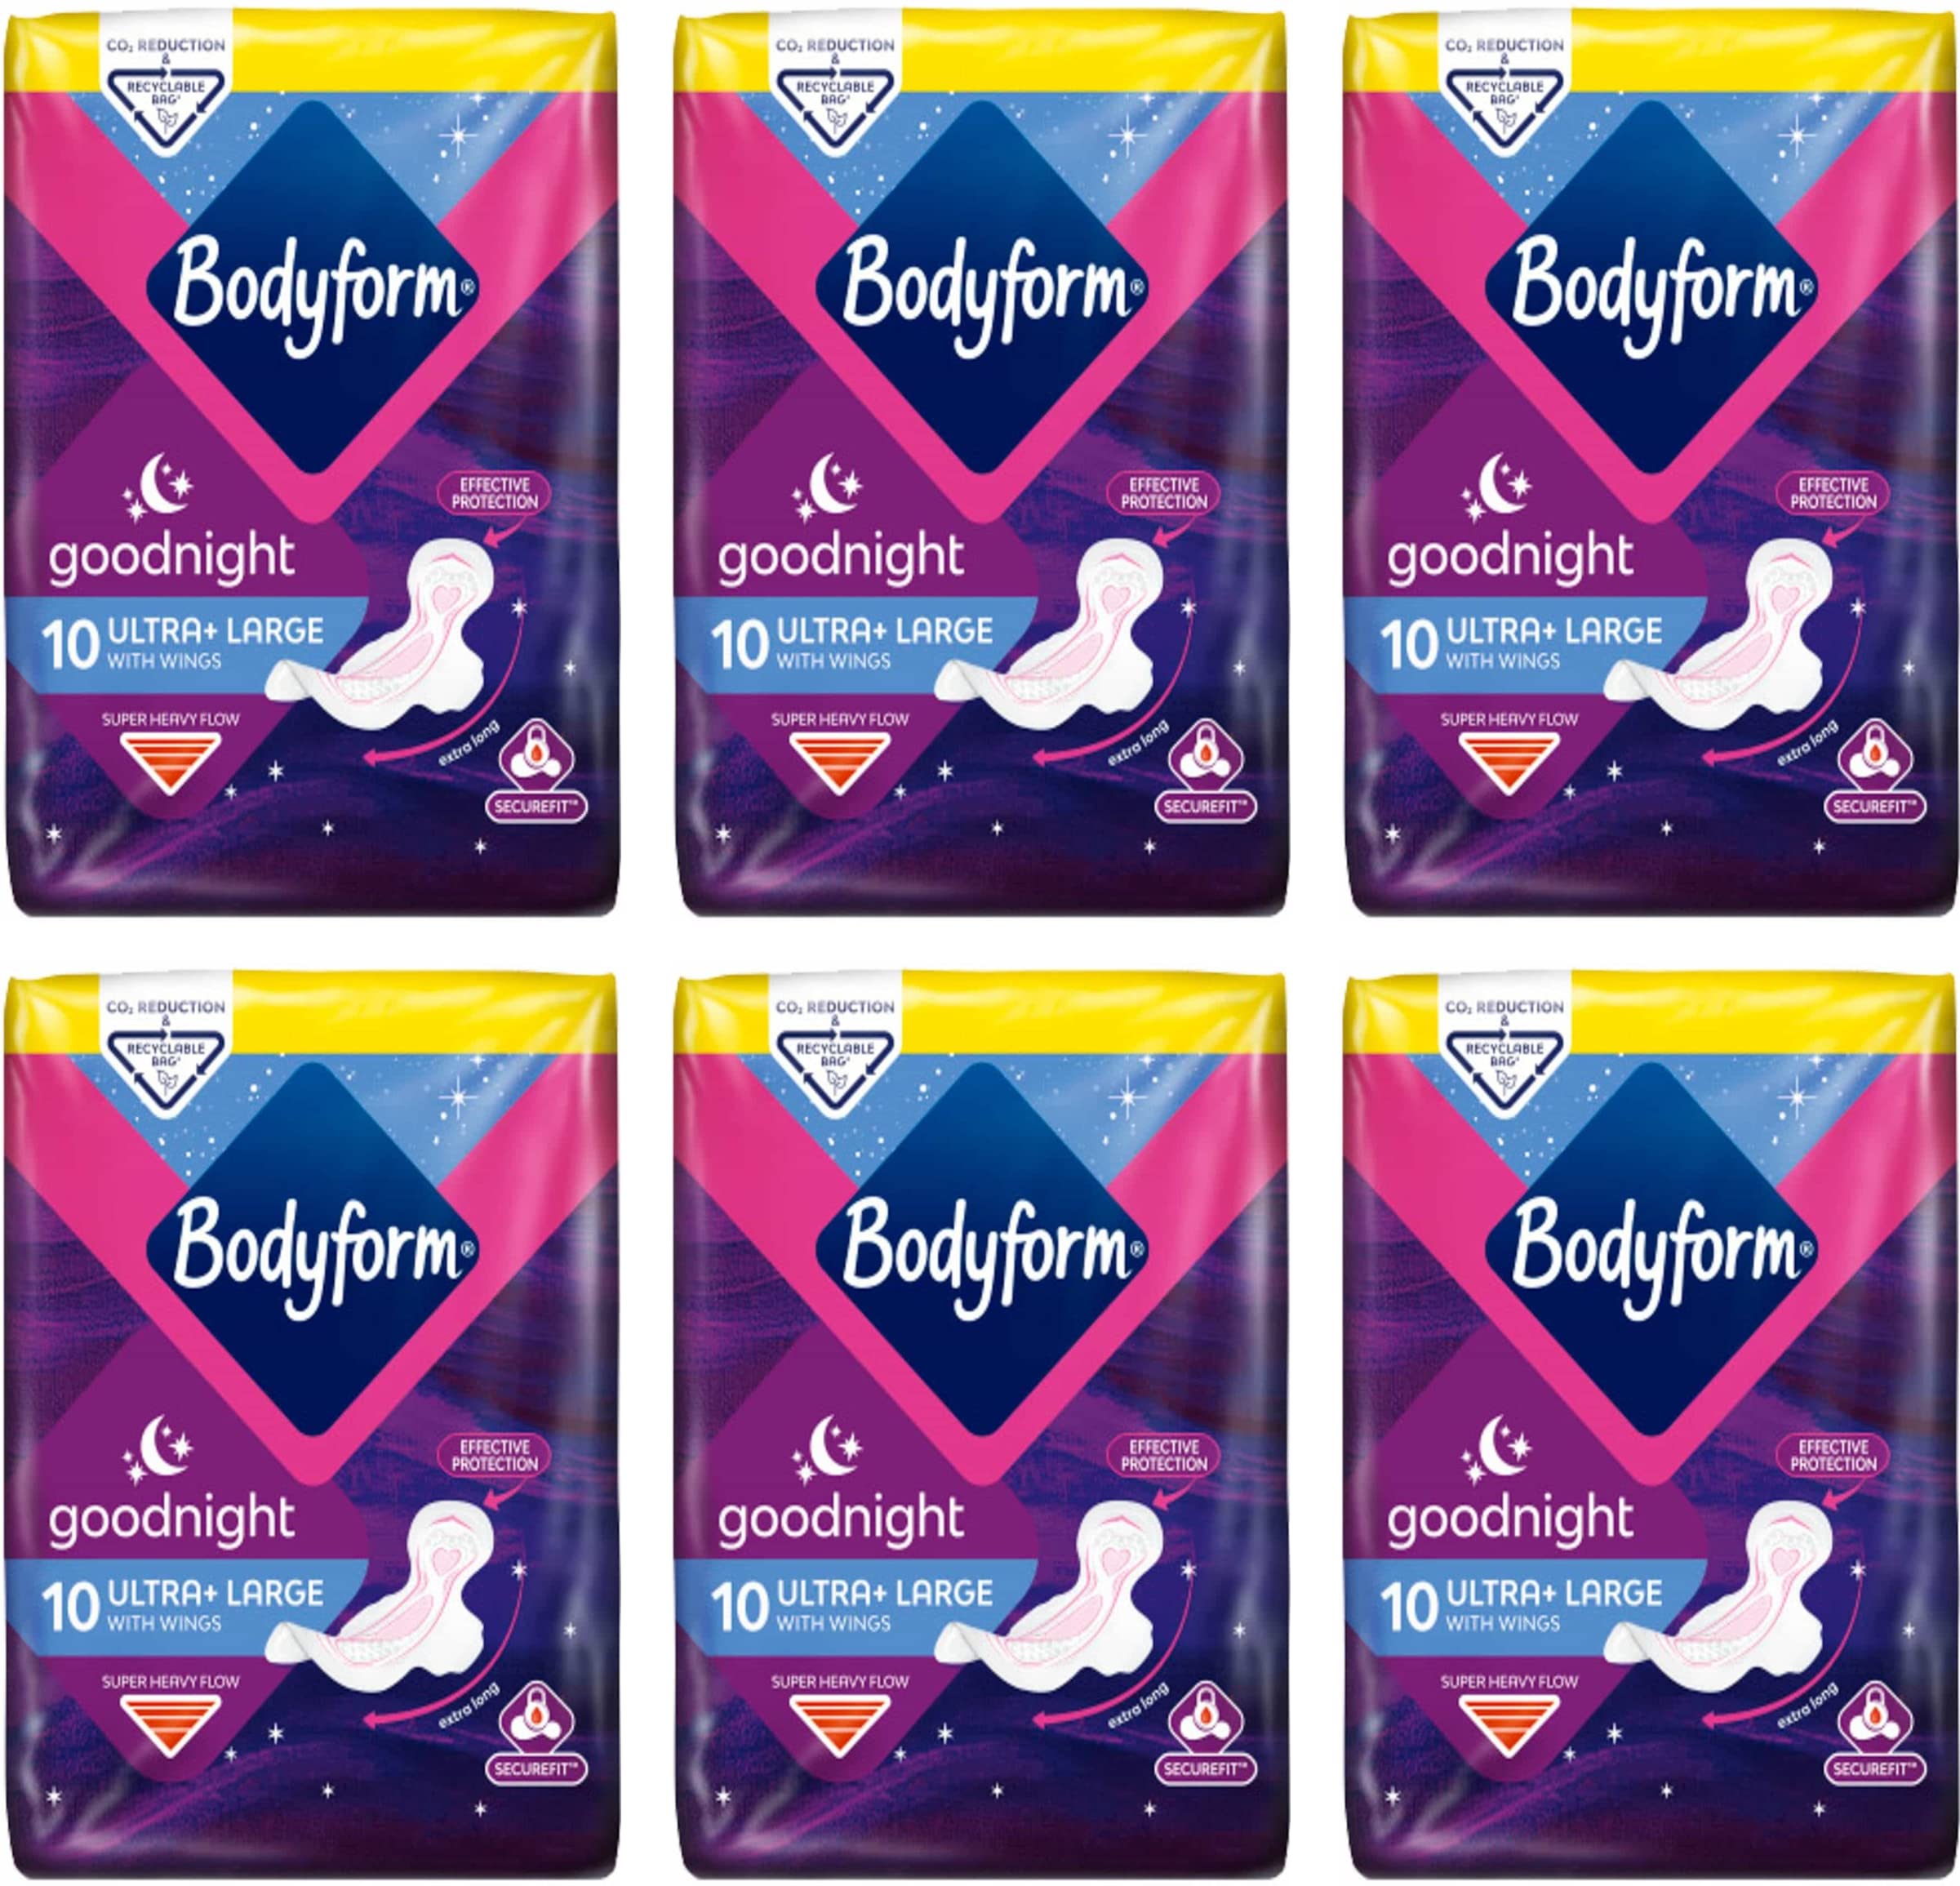 Bodyform Goodnight Ultra Towels 10 Per Pack Case of 6